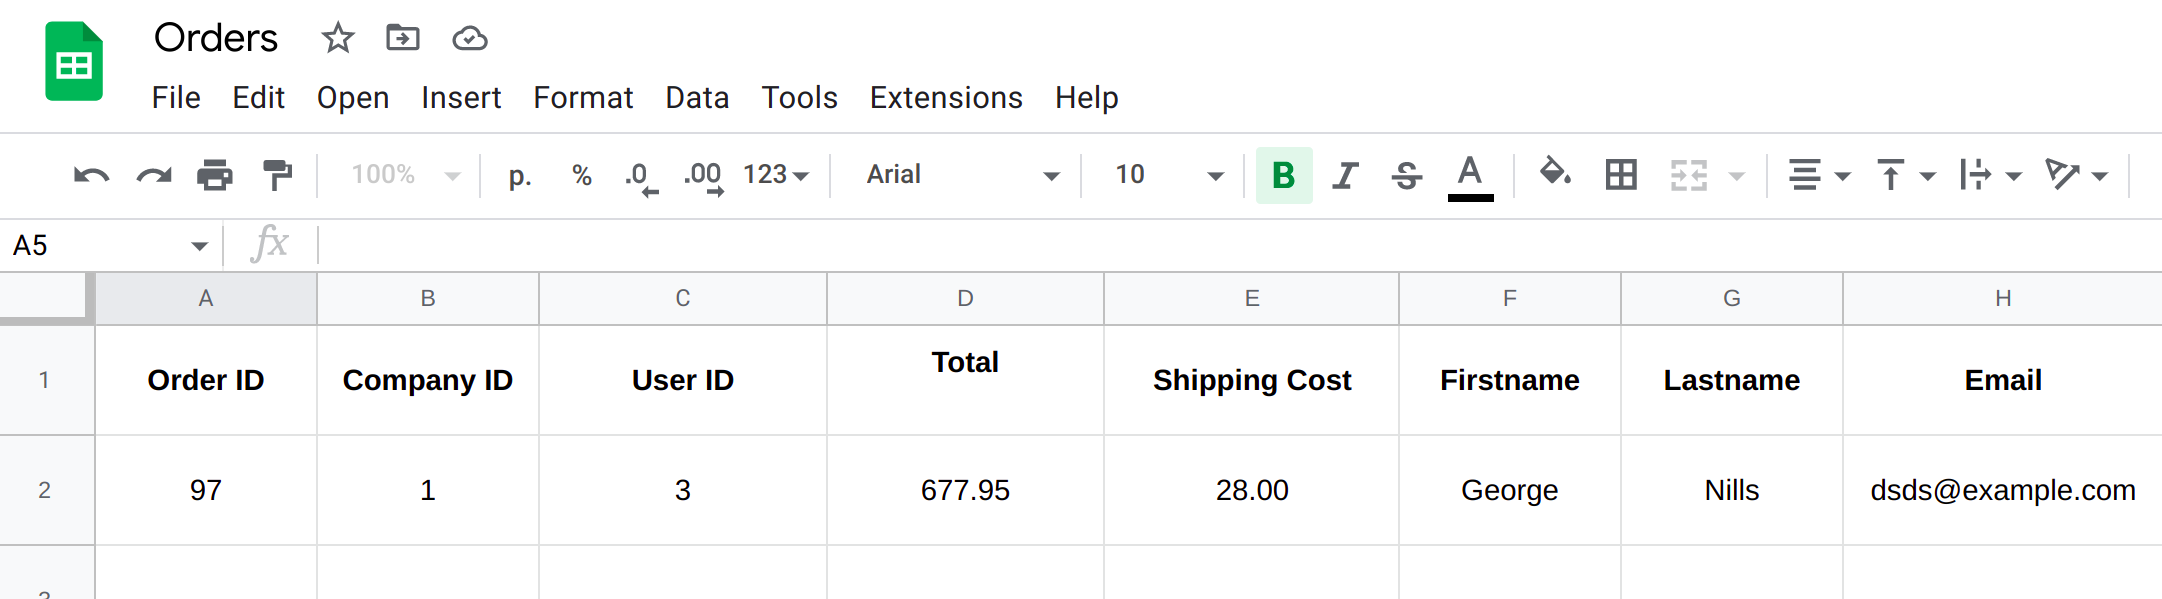 Screenshot of the table with the order details in the Google Sheets.